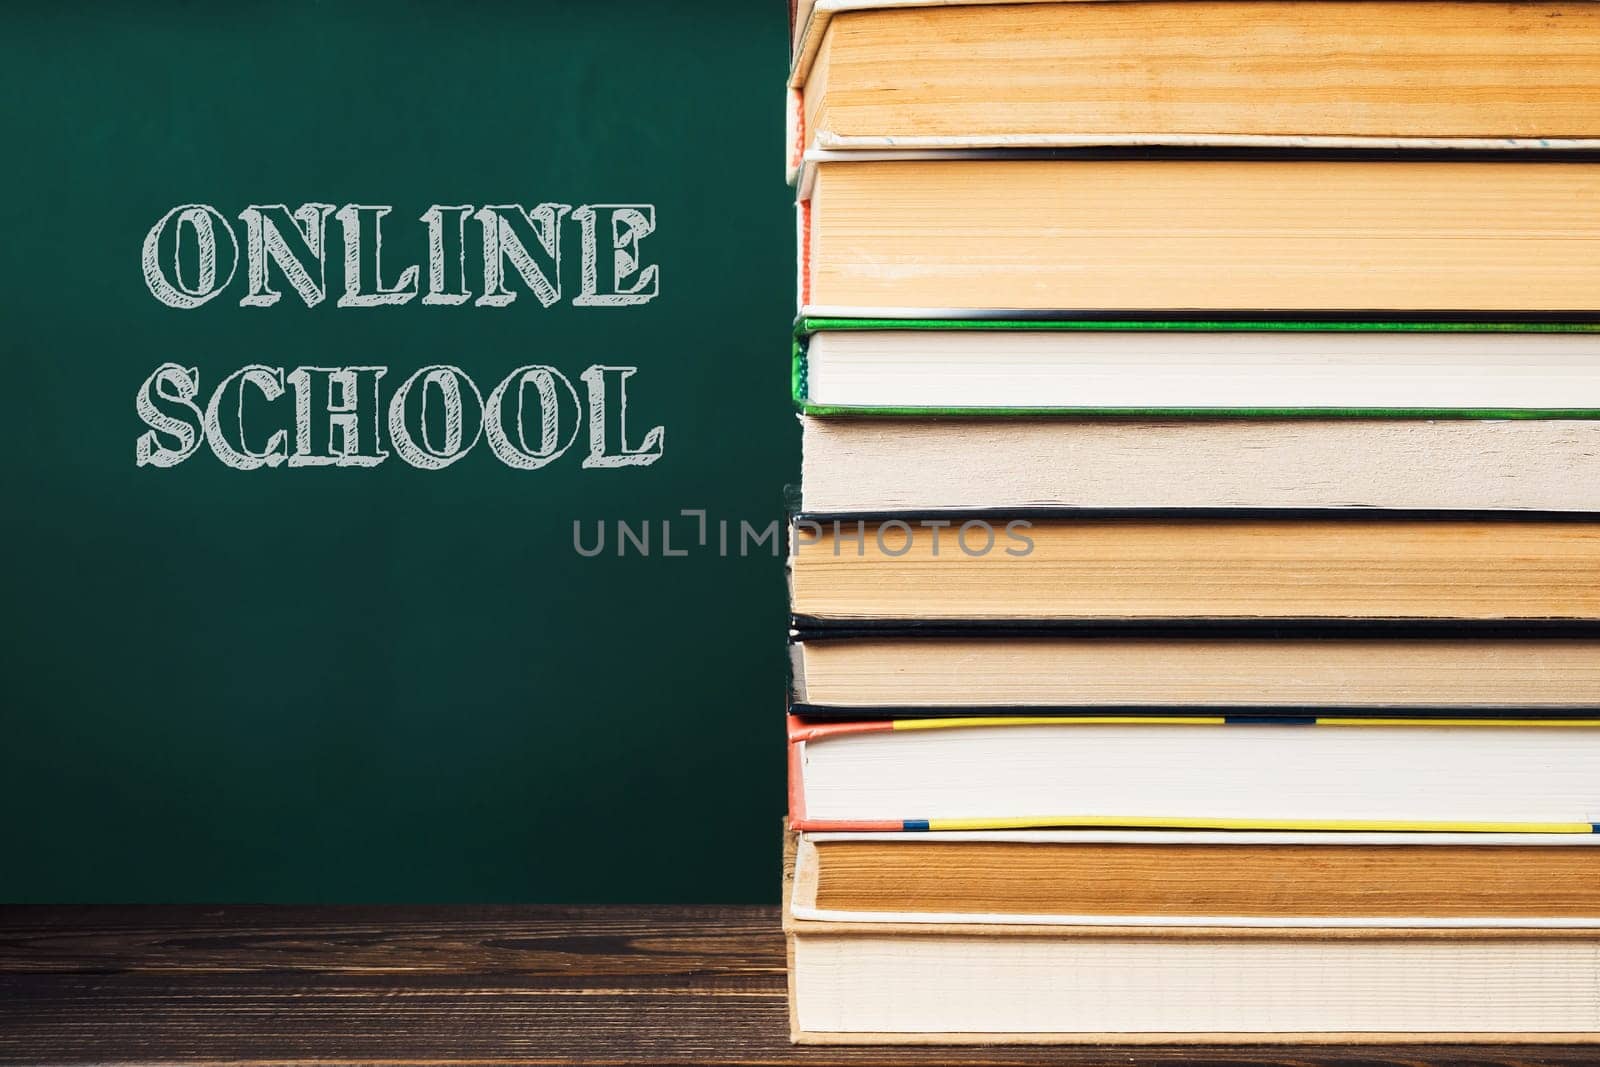 A stack of books with the word online school written on a chalkboard behind them. The books are piled on top of each other, creating a sense of importance and education